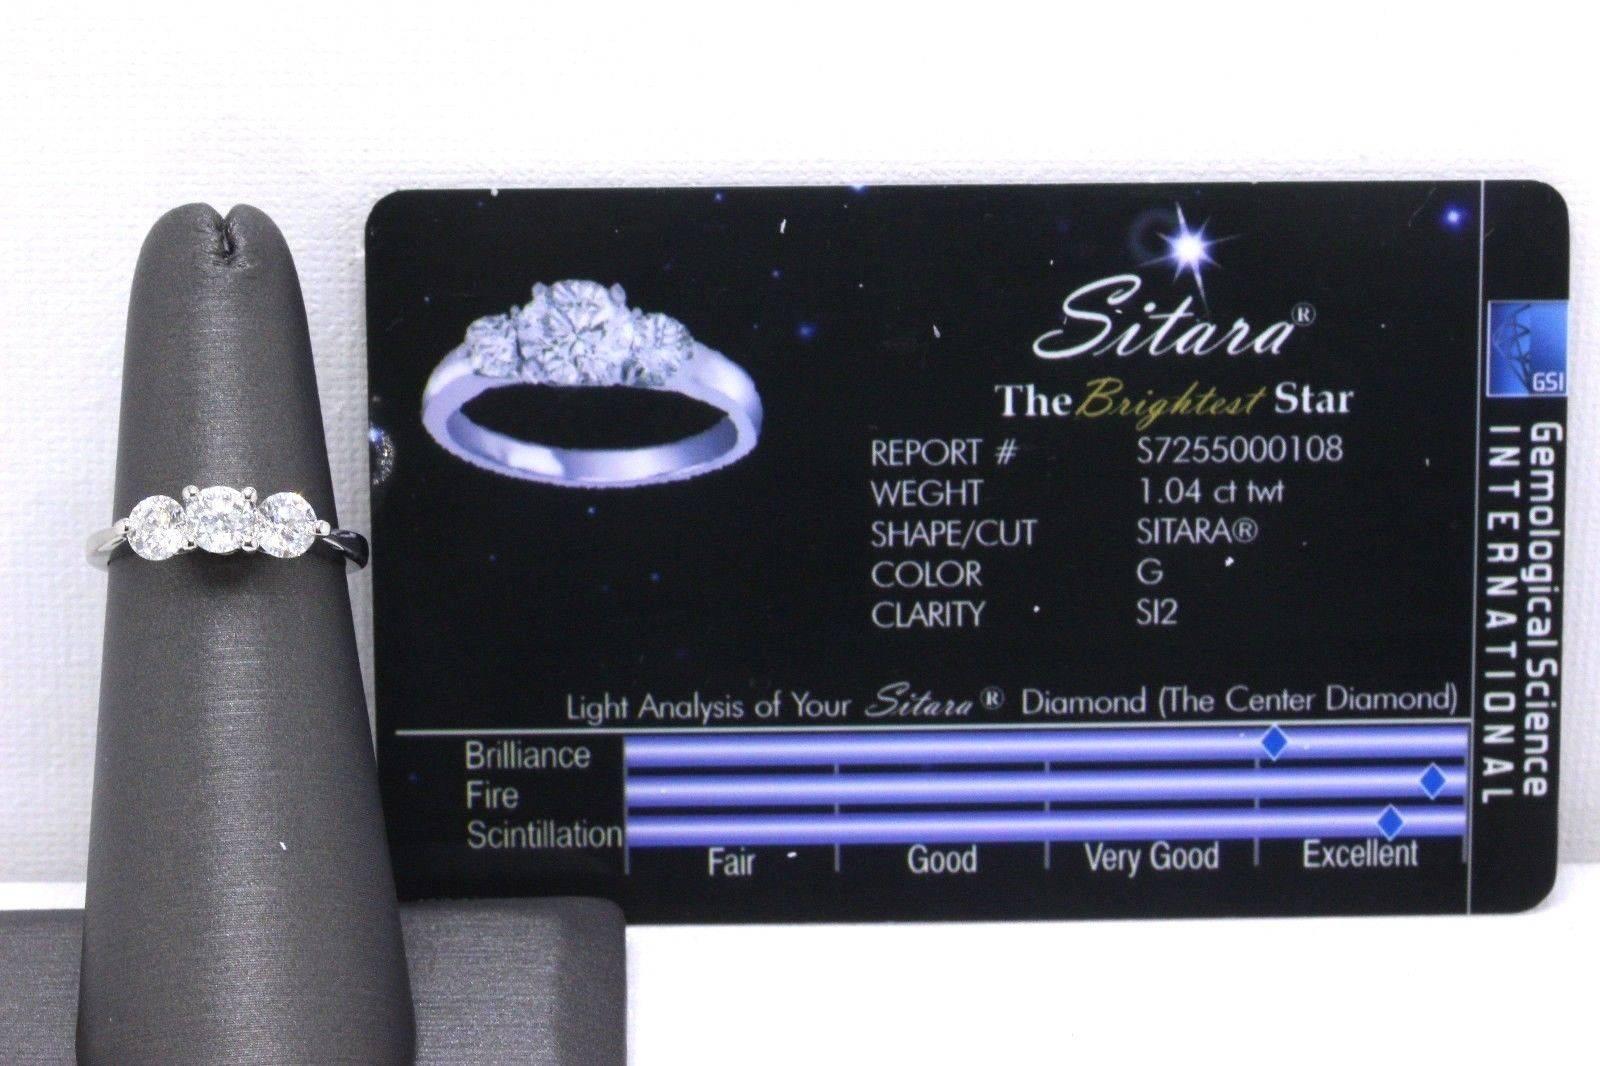 SITARA THE BRIGHTEST STAR DIAMOND ENGAGEMENT RING
Style: Three-Stone
Serial Number:  GSI Report # S7255000108
Metal:  14KT White Gold
Size:   5.25 - Sizable
Total Carat Weight:  1.04 TCW ( 0.32 cts - 0.40 cts - 0.32 cts )
Diamond Shape:  Sitara